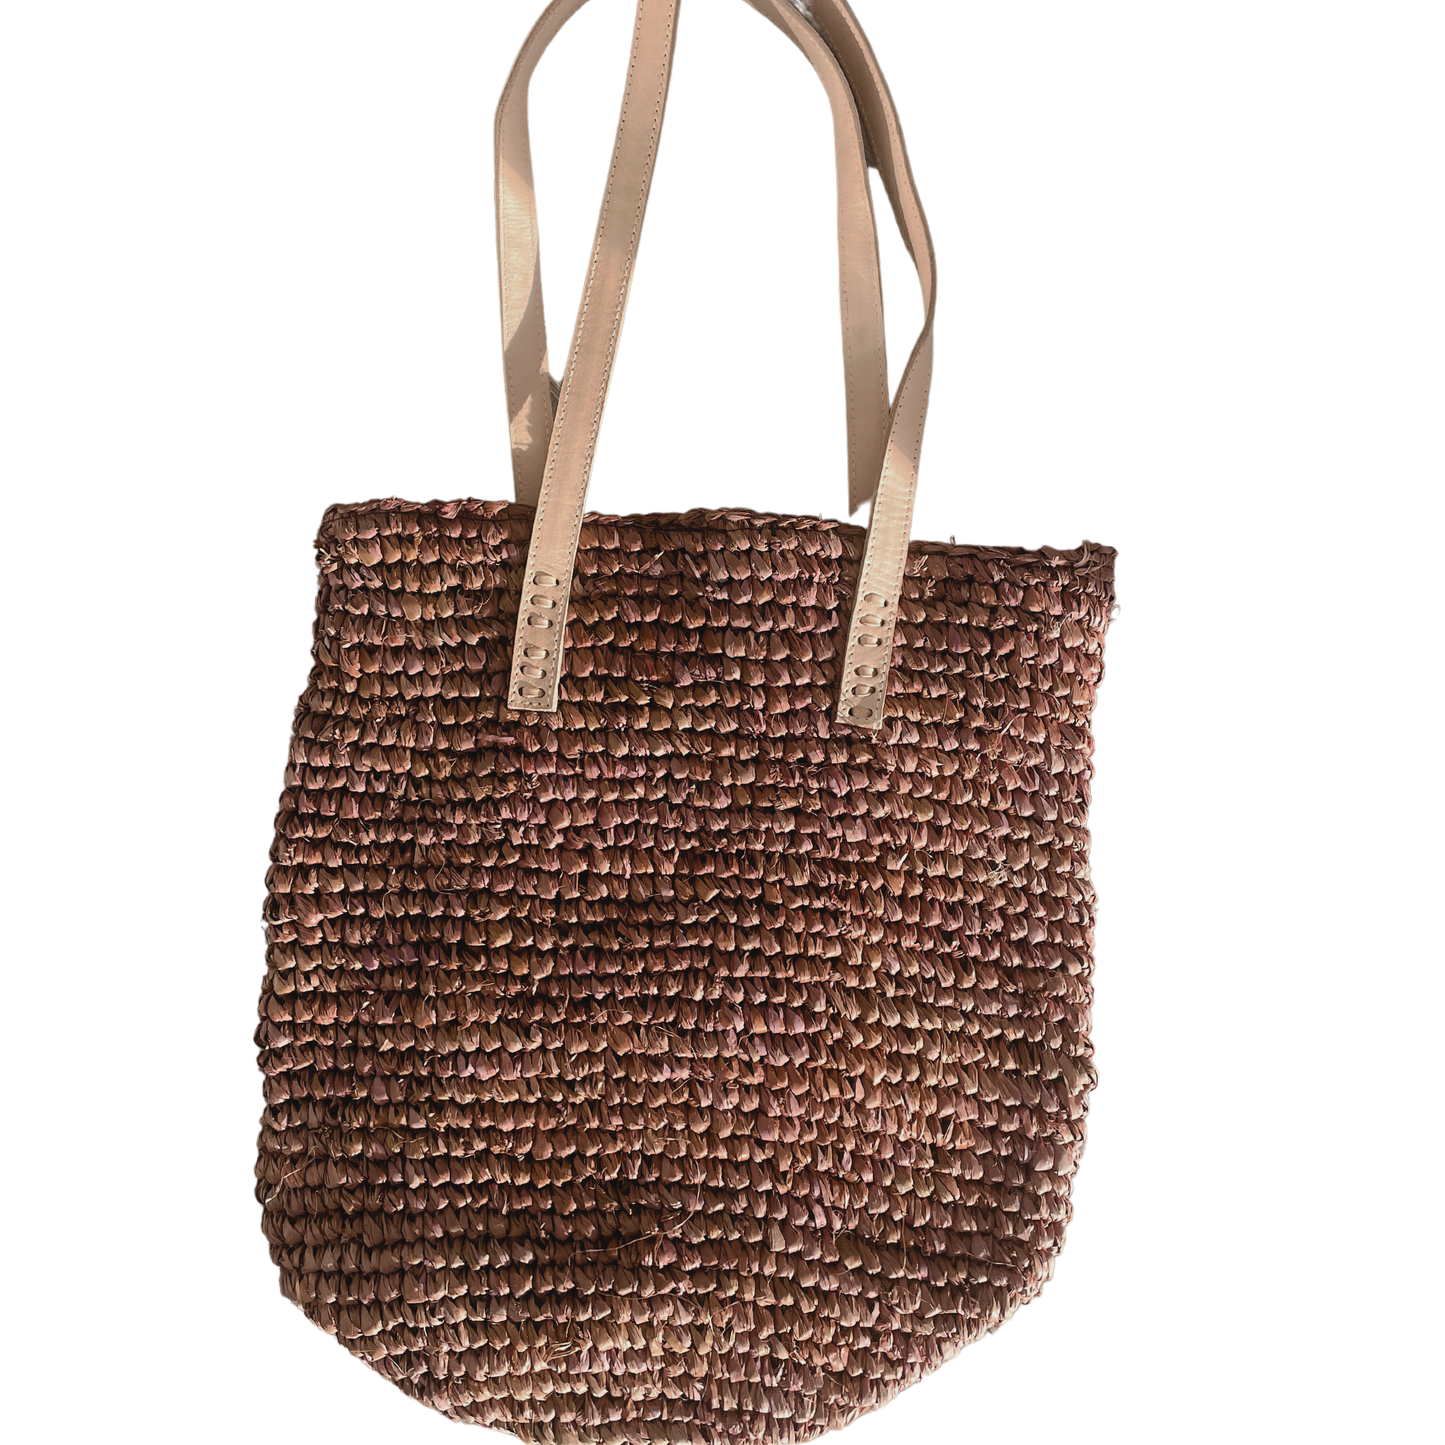 Braided bag in raffia with leather straps - brown